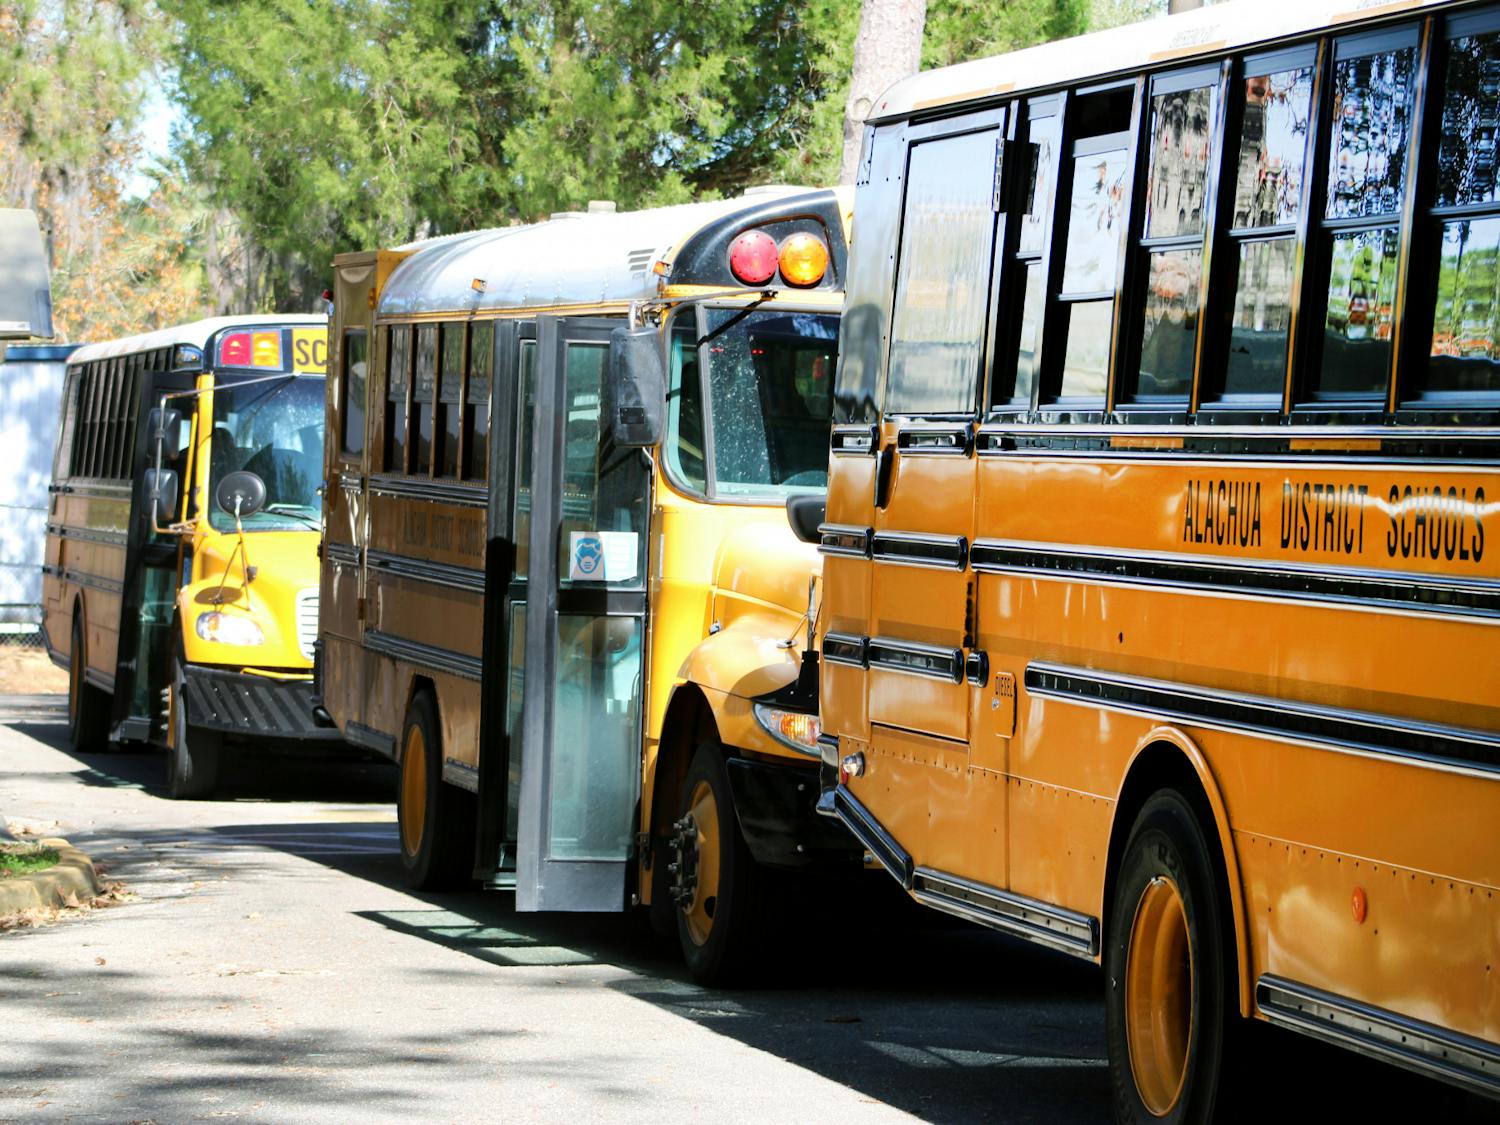 Alachua County Public School buses await students at Littlewood Elementary School on Wednesday, Feb. 2.